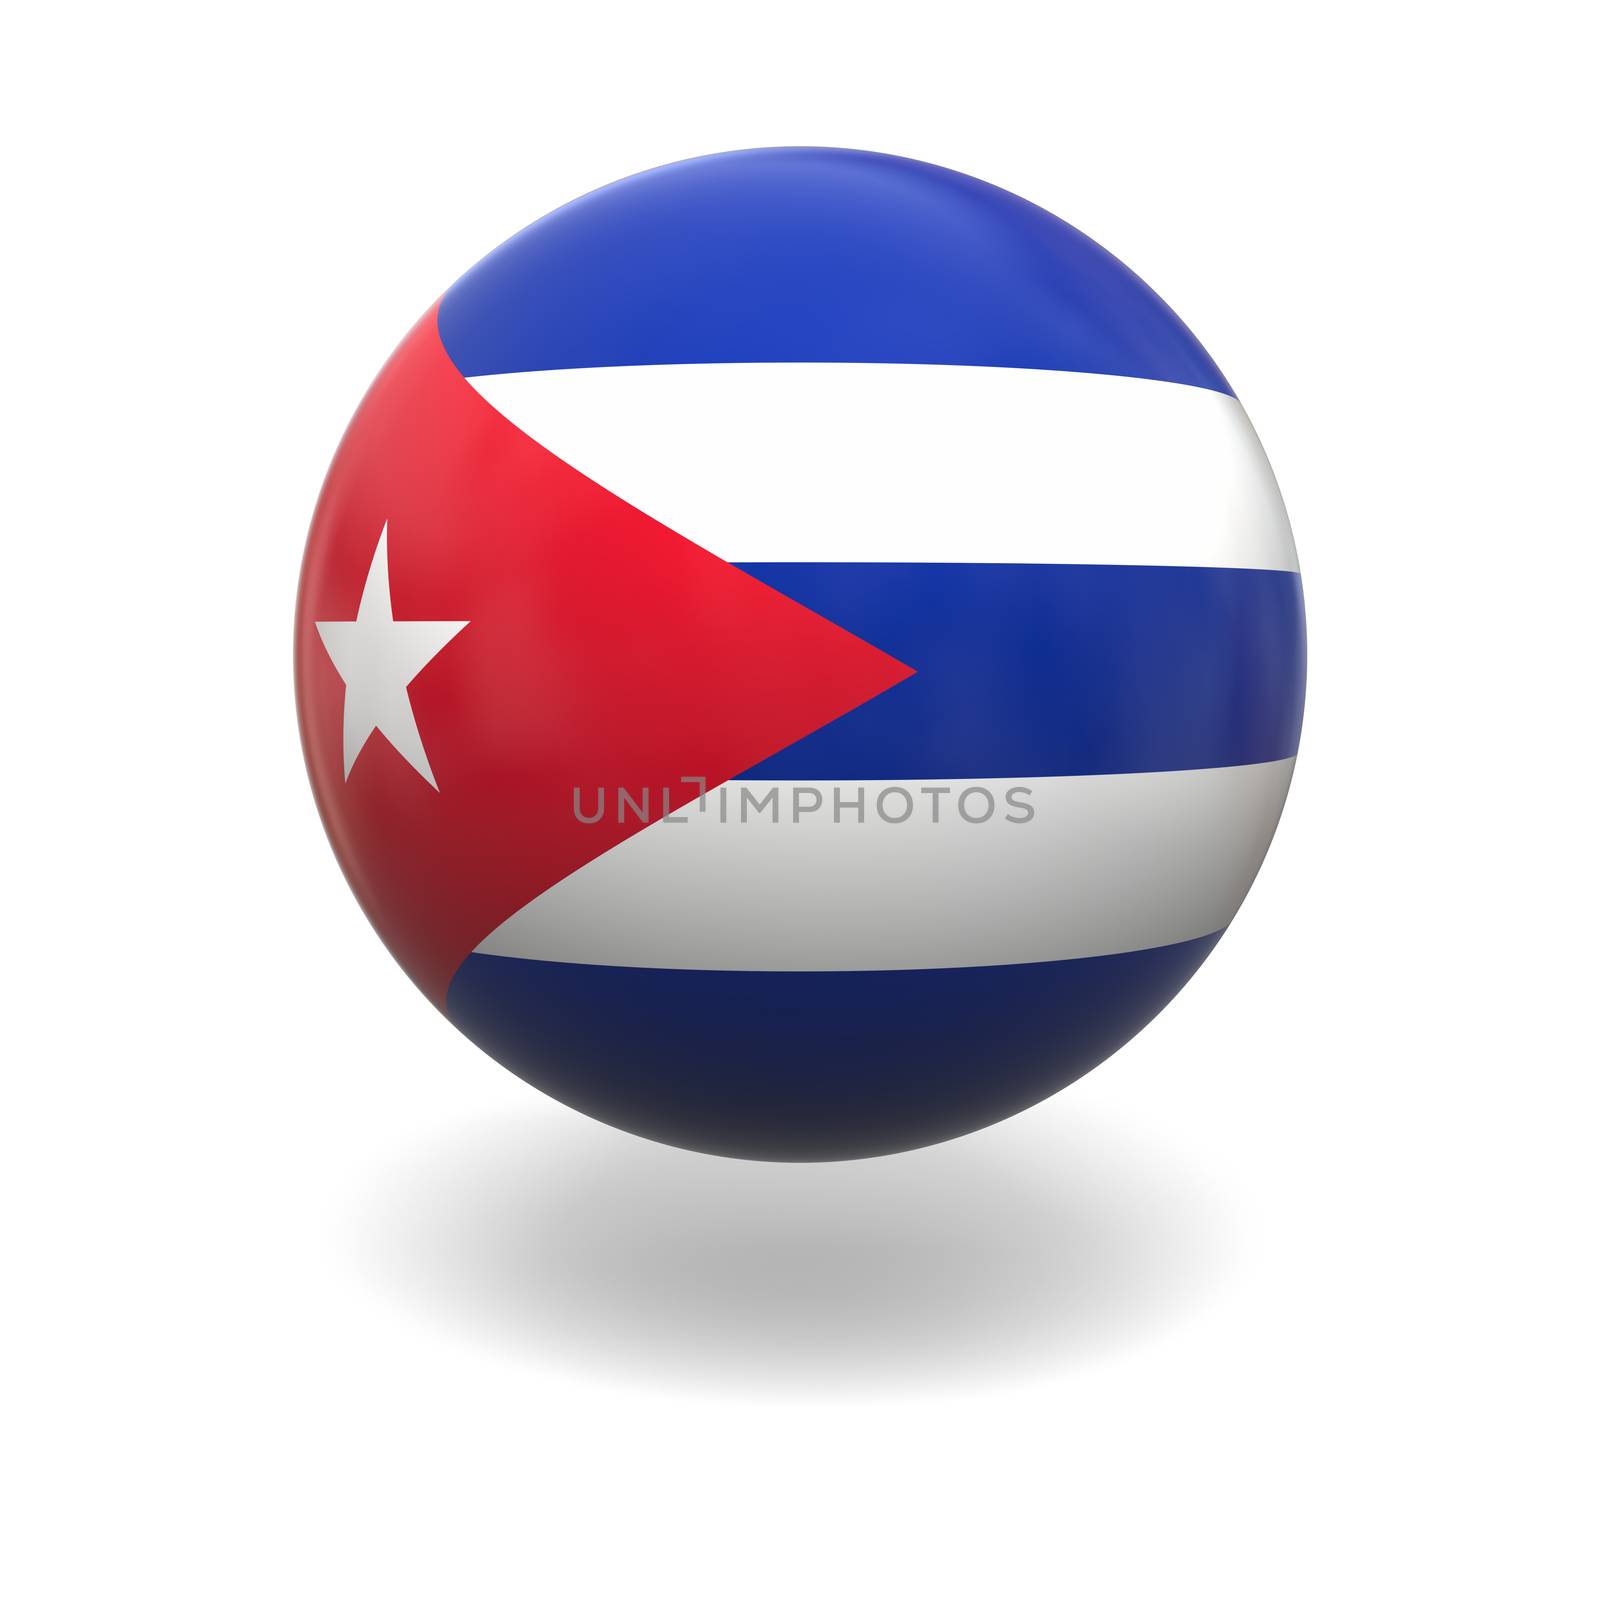 Cuban flag by Harvepino